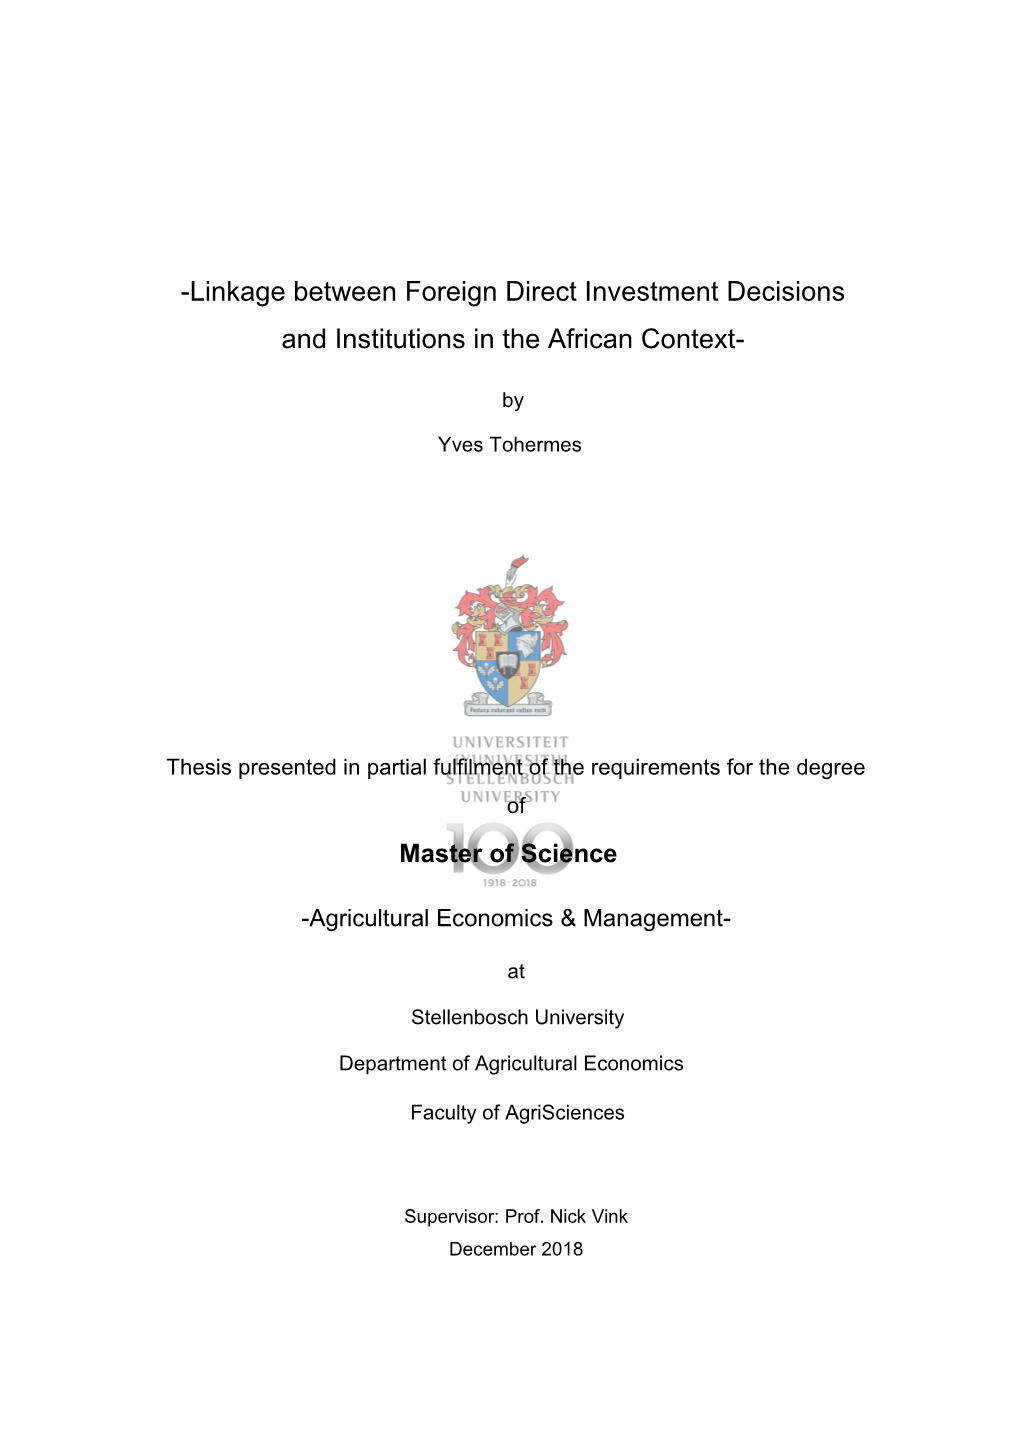 Linkage Between Foreign Direct Investment Decisions and Institutions in the African Context